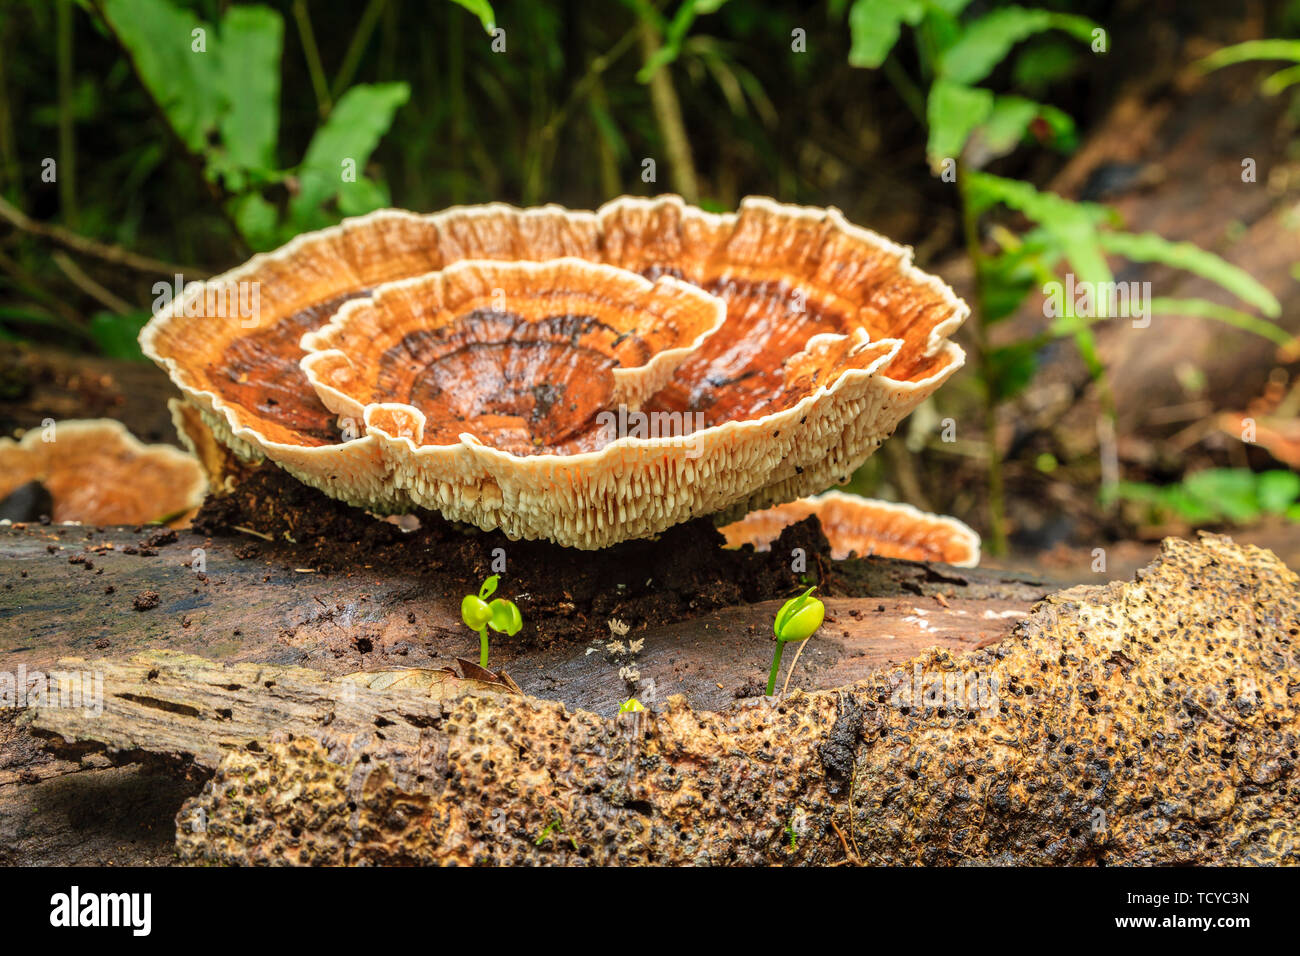 Close-up image of a wood fungi or polyporales in tropical forest in Costa Rica Stock Photo